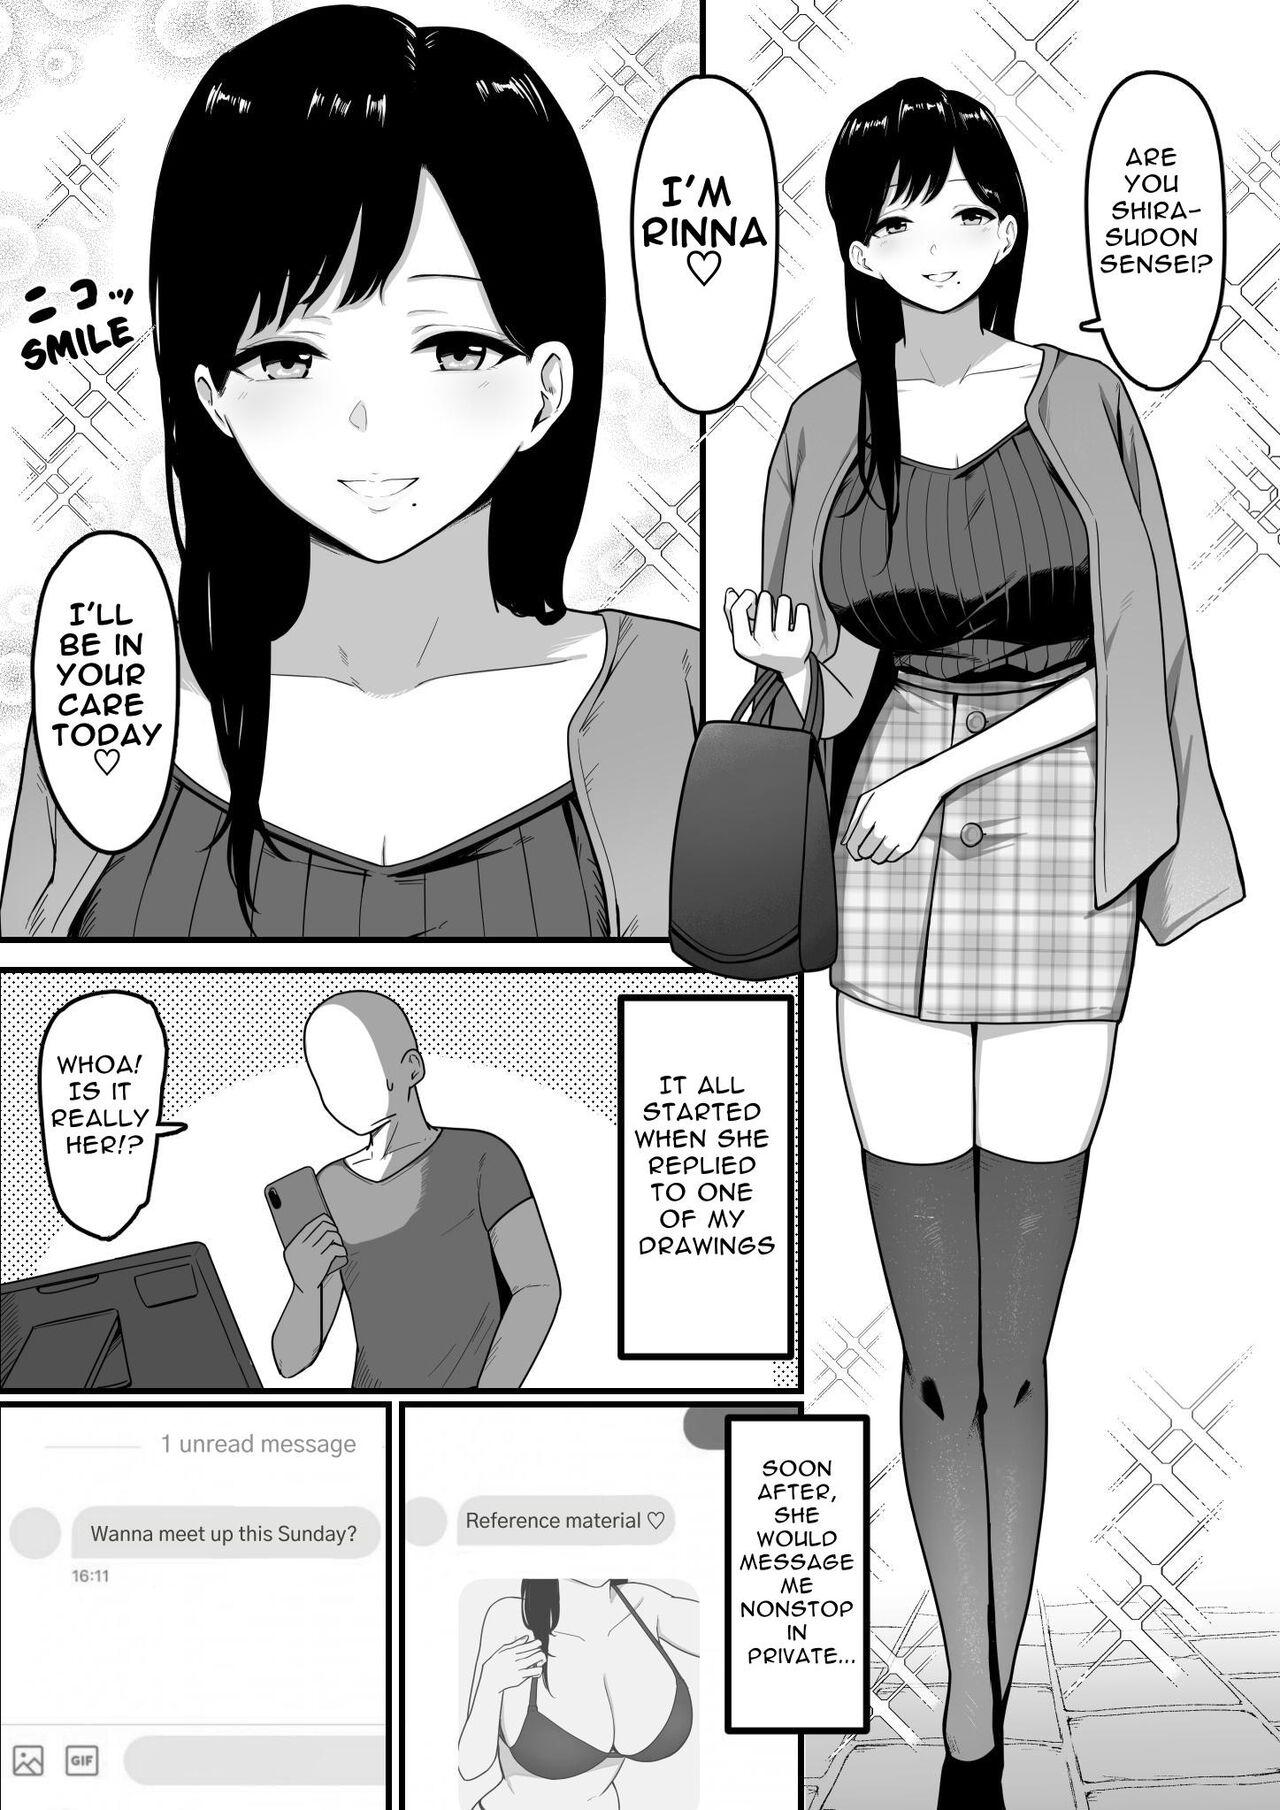 Class Room Dosukebe Kyonyuu Layer to Off-Pako shite kita. | Offline sex meetup with a perverted busty cosplayer - Original Cousin - Page 3